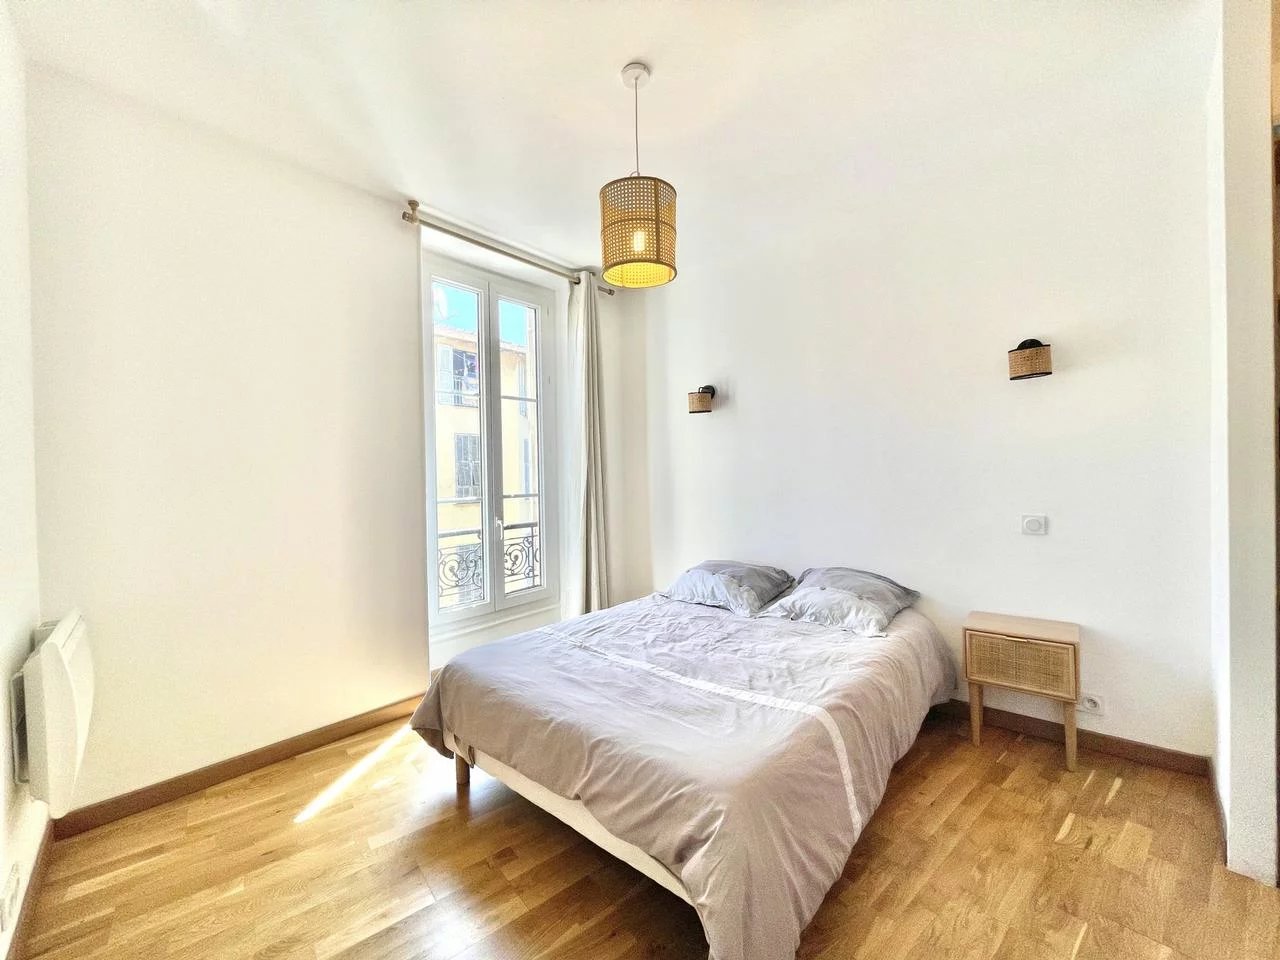 Appartement  3 Rooms 49.92m2  for sale   189 000 €